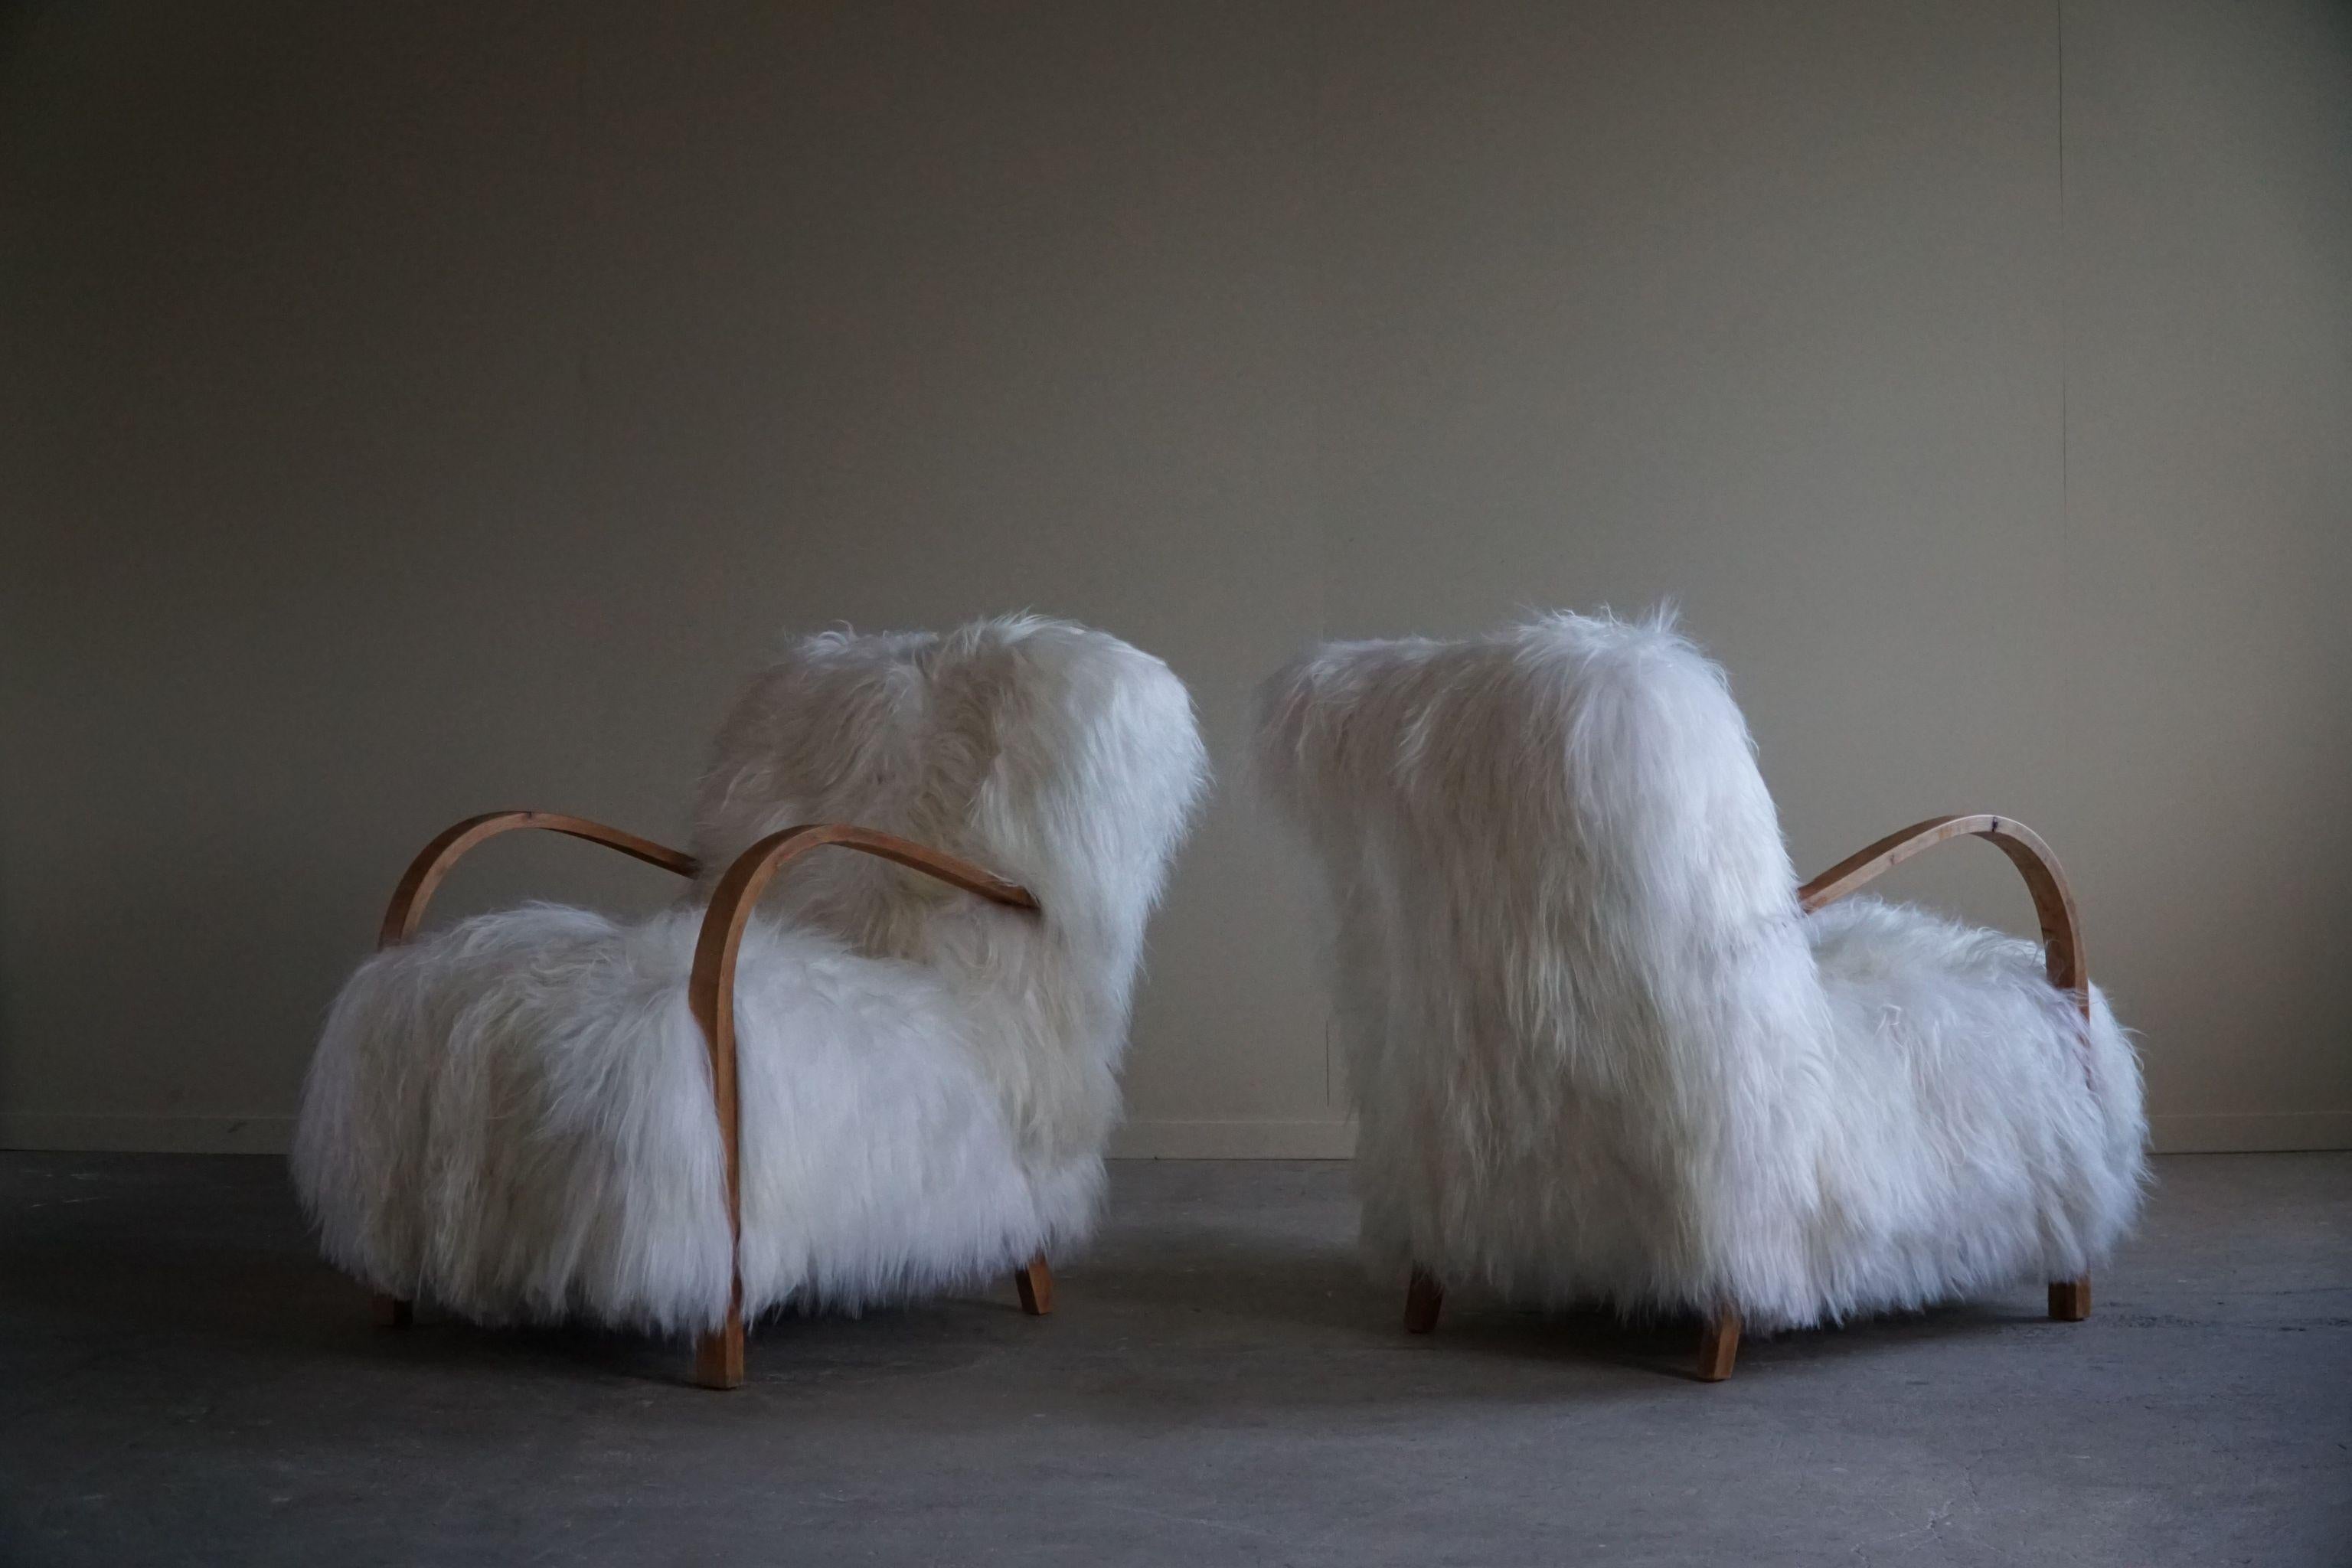 Such an exquisite and rare pair of Art Deco lounge chairs with armrests made in solid oak. The chairs have been expertly reupholstered in a luxurious Icelandic sheepskin, which adds a soft and tactile texture to the overall aesthetic. The wool is